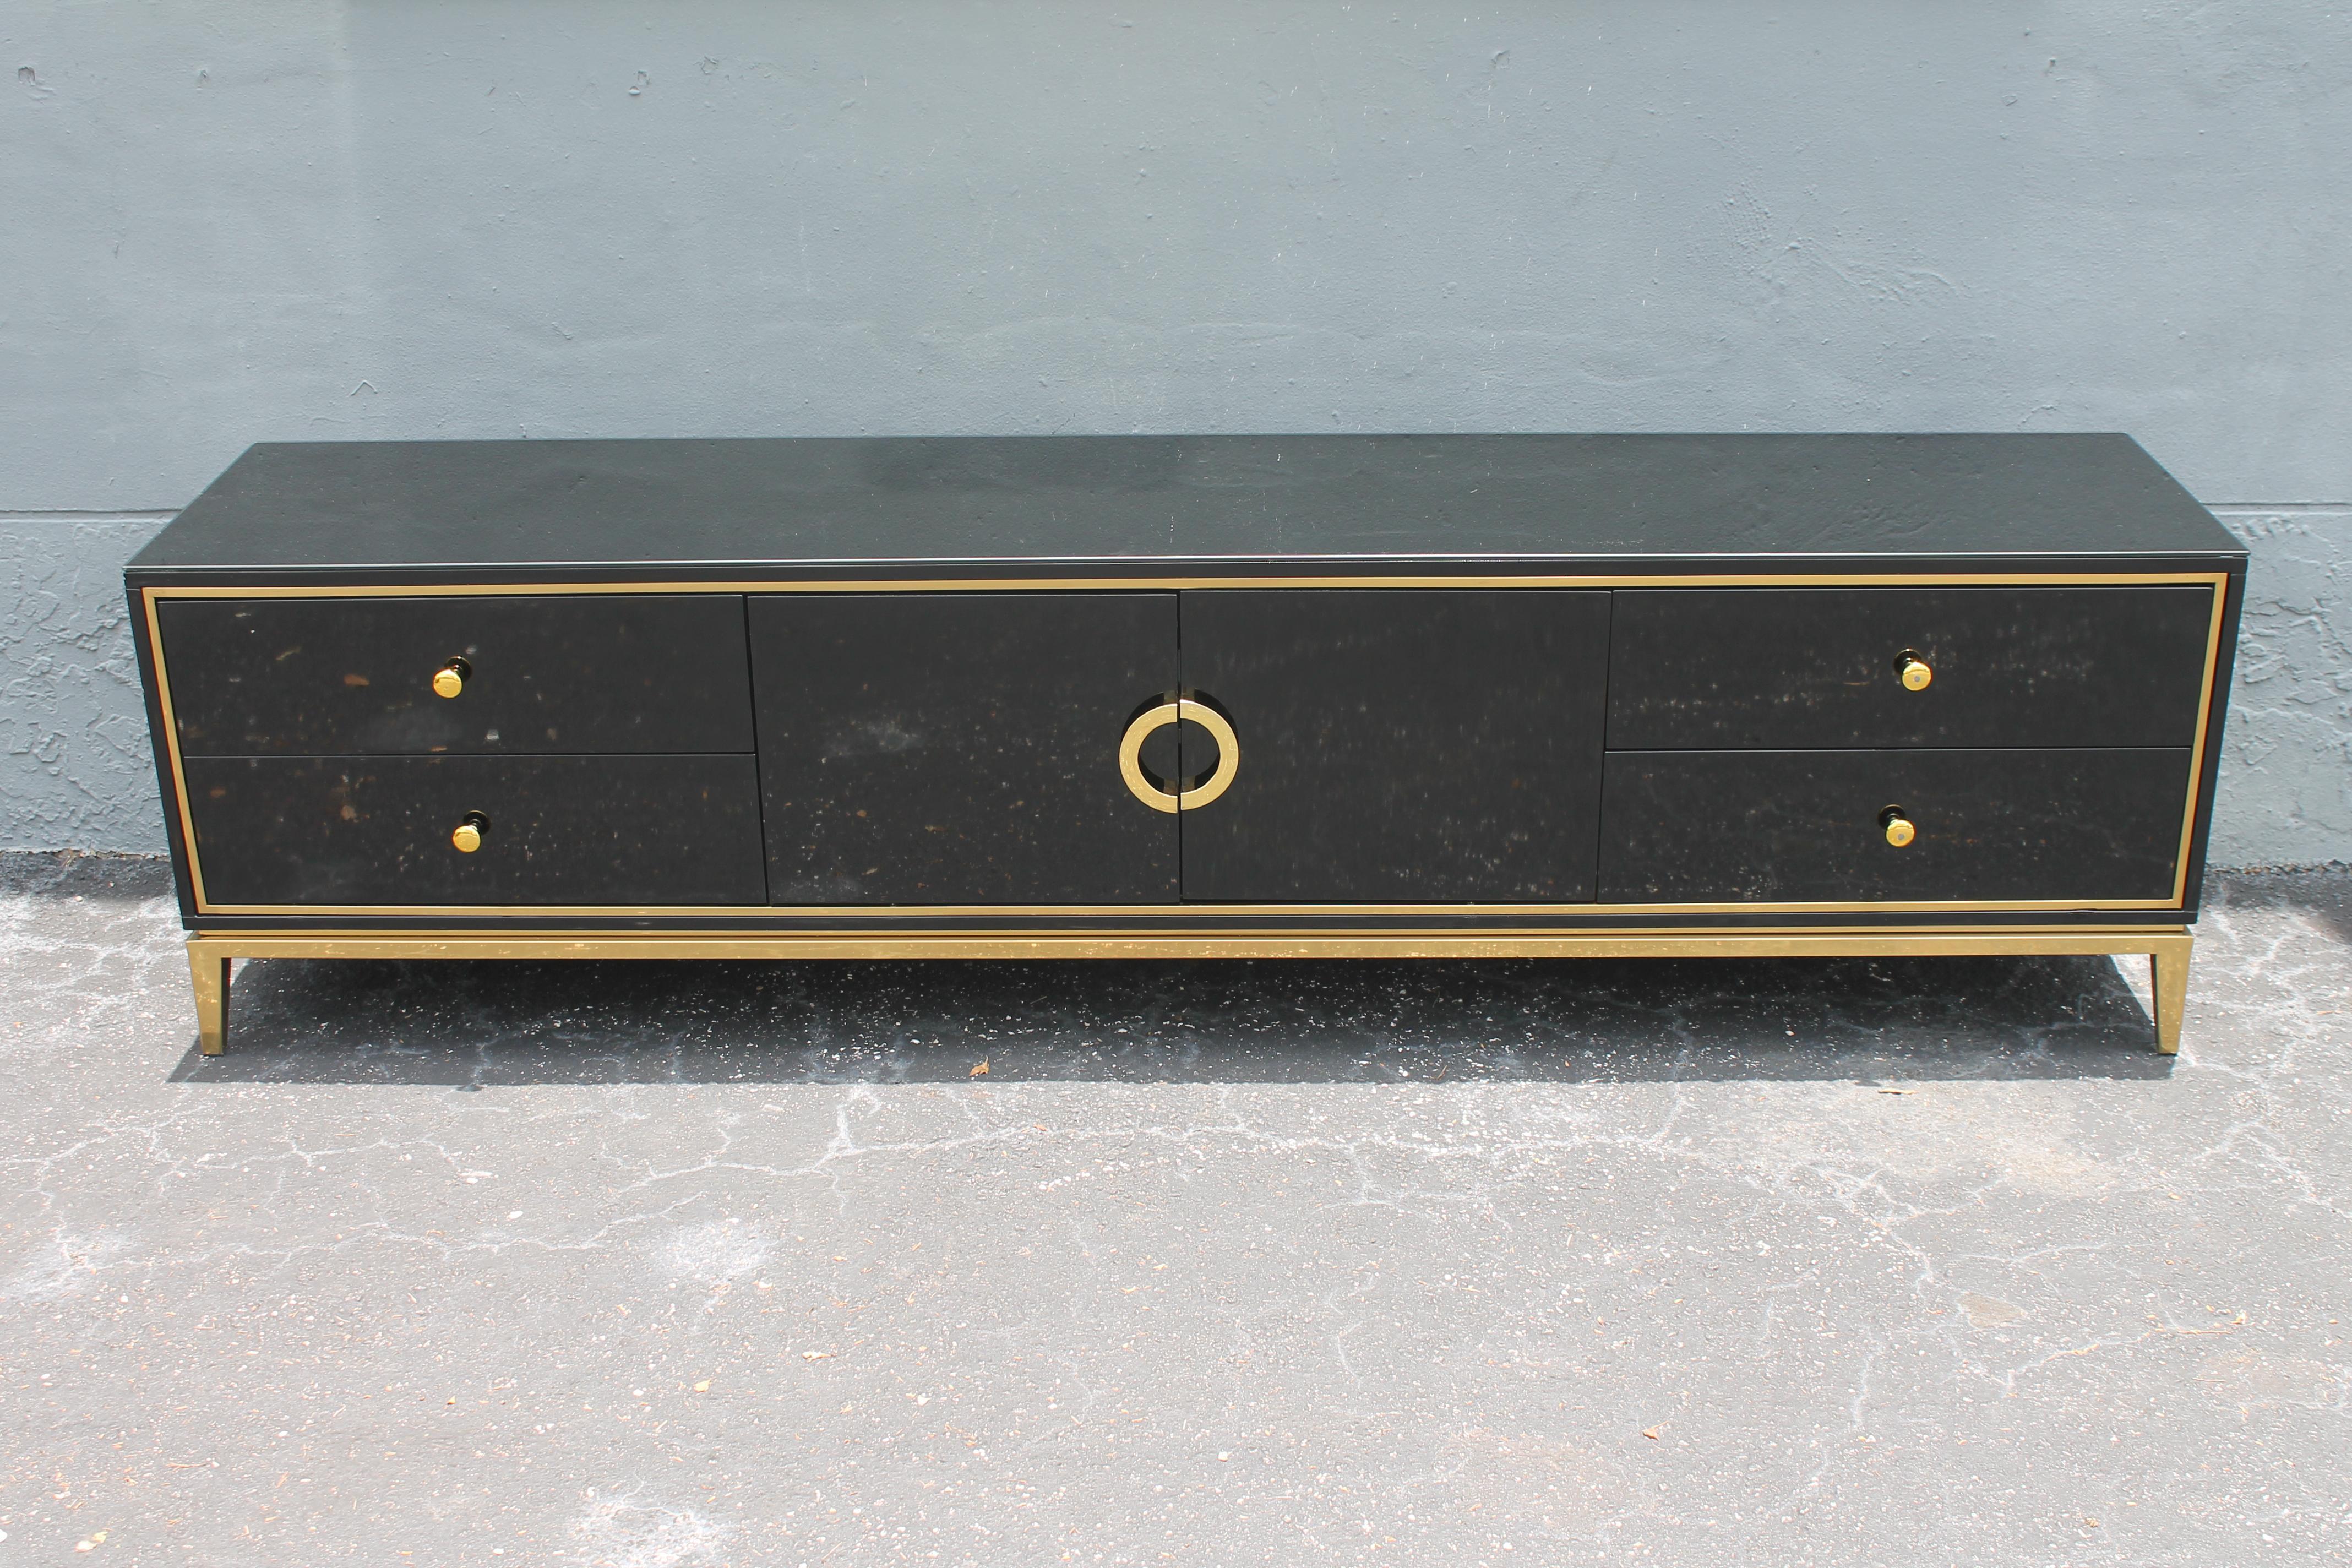 1960's Mid Century Modern Black Lacquer Low Buffet/ Sideboard/ Credenza in the style of Pierre Cardin. This piece would work well under the television or behind the sofa. Beautiful brass accents. Lots of storage space.